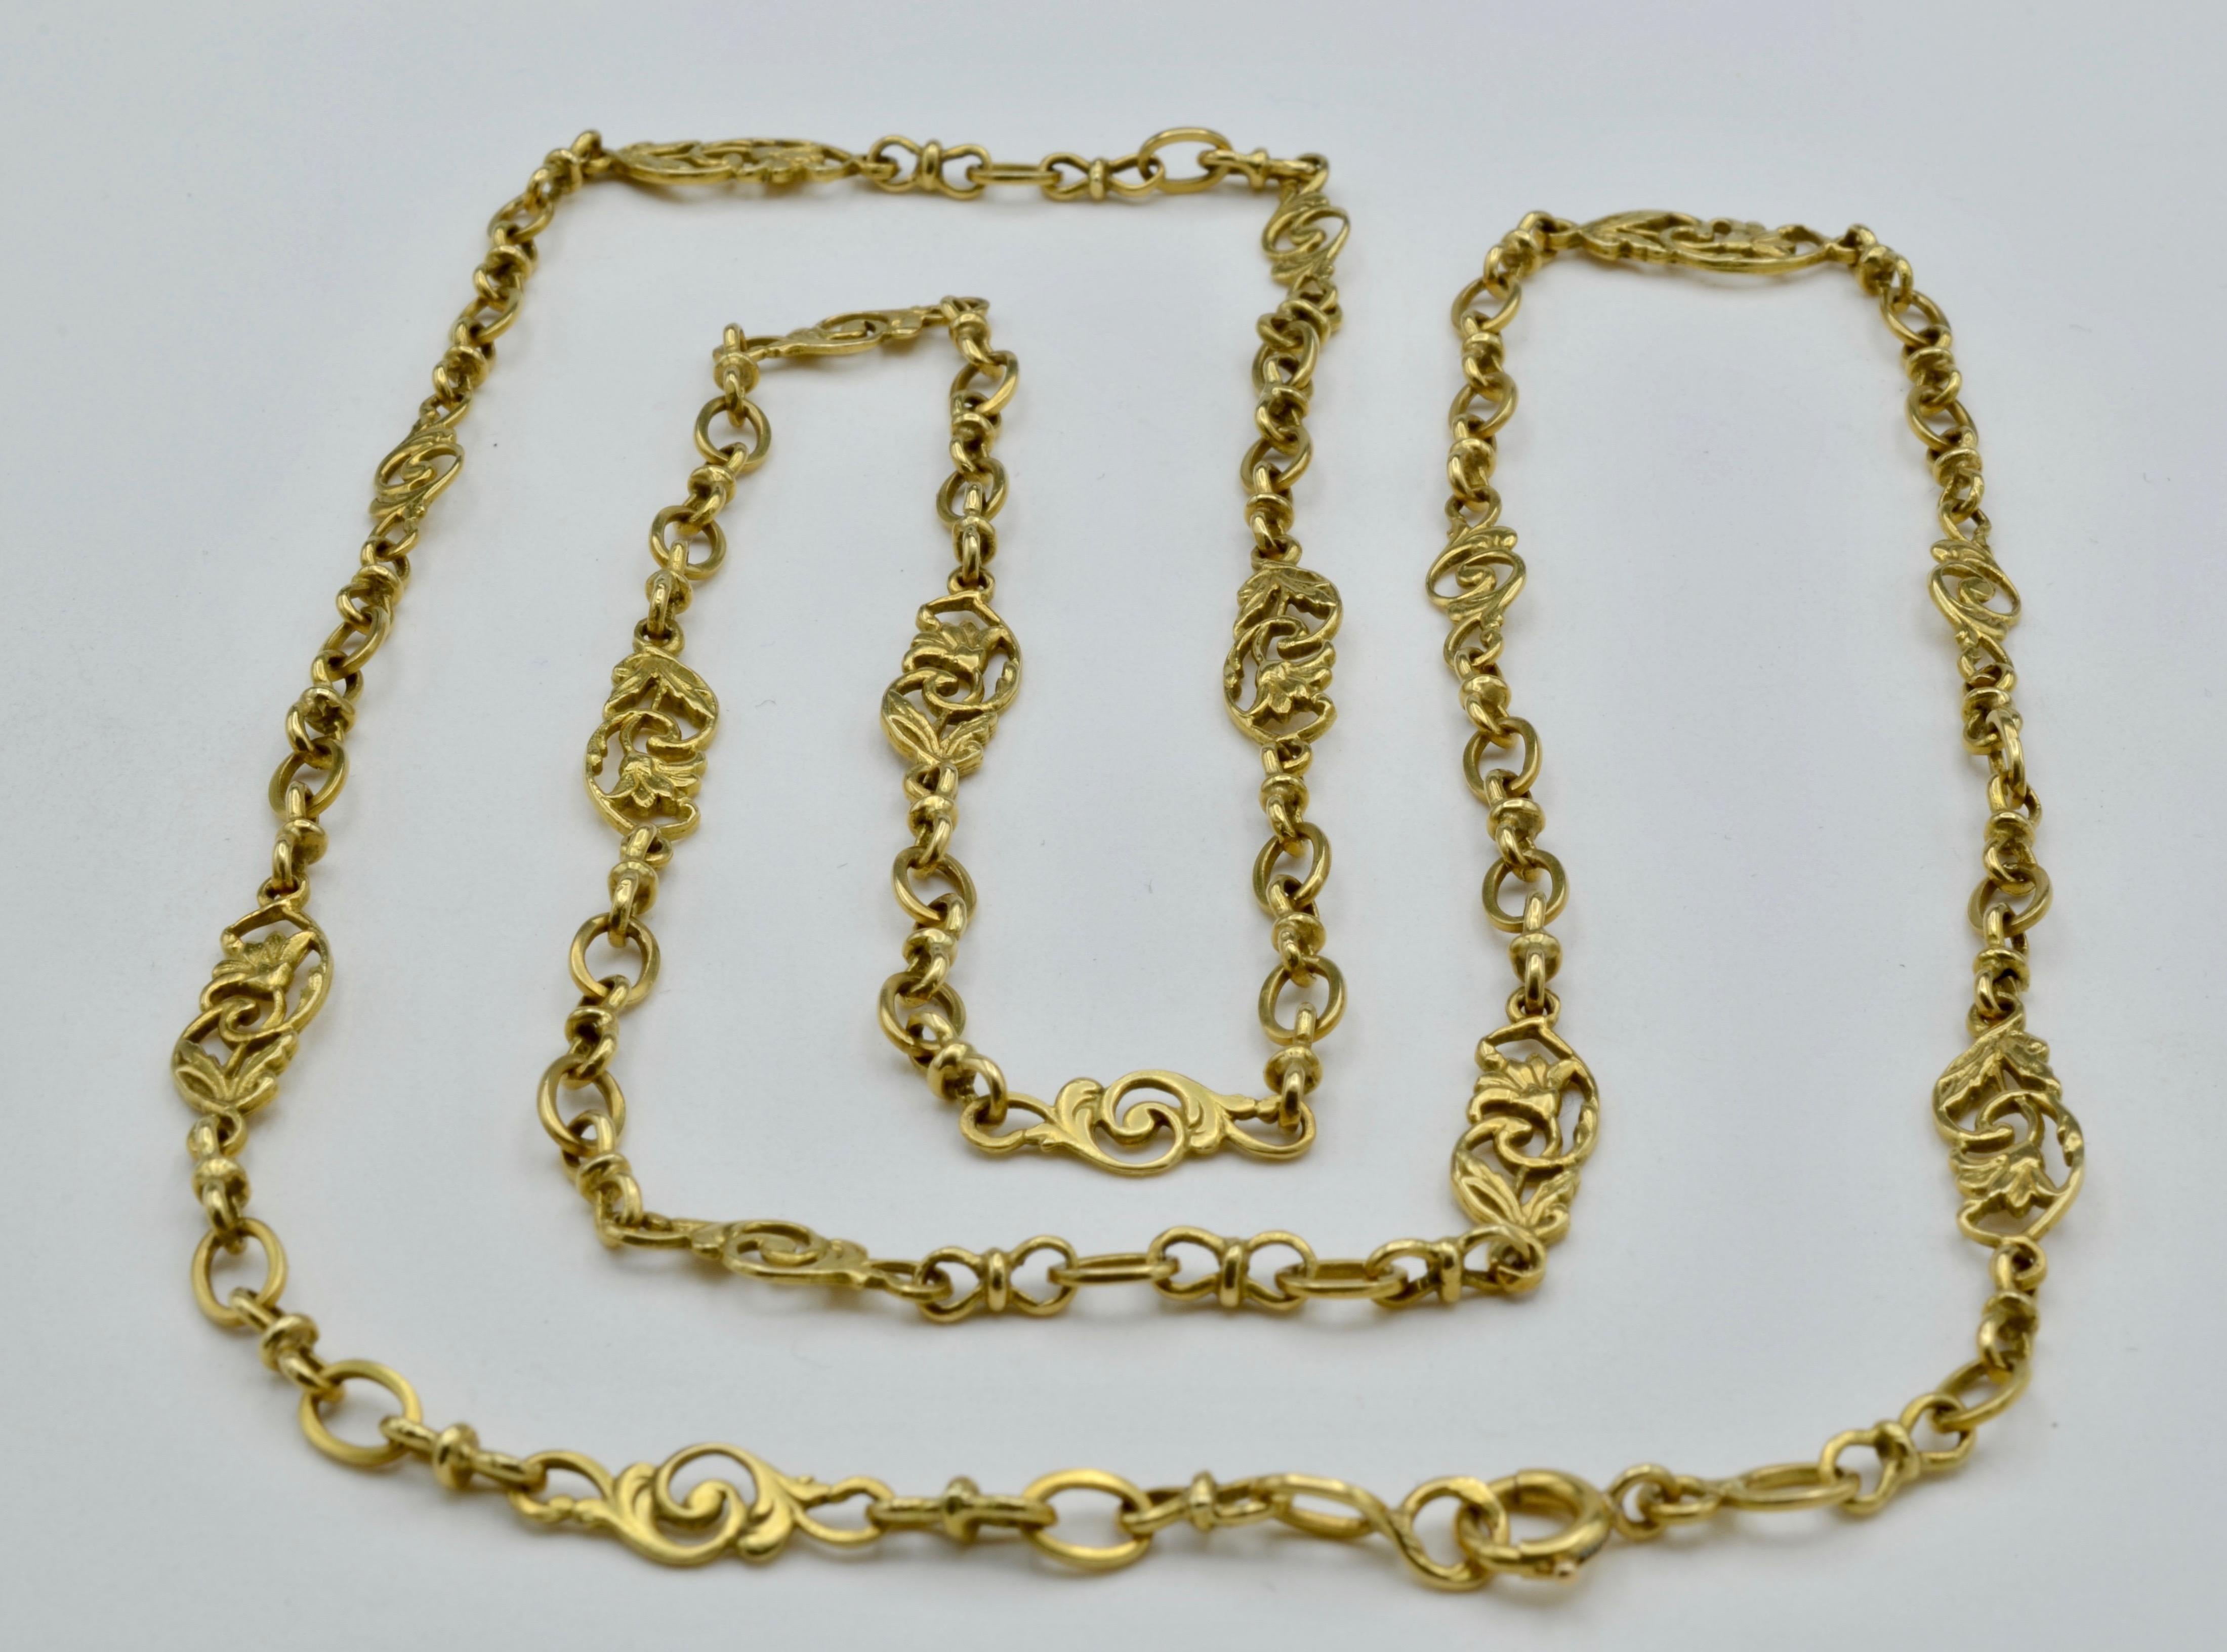 Art Nouveau French Antique Sautoir Yellow Gold Chain Link Necklace with Lillies and Vines